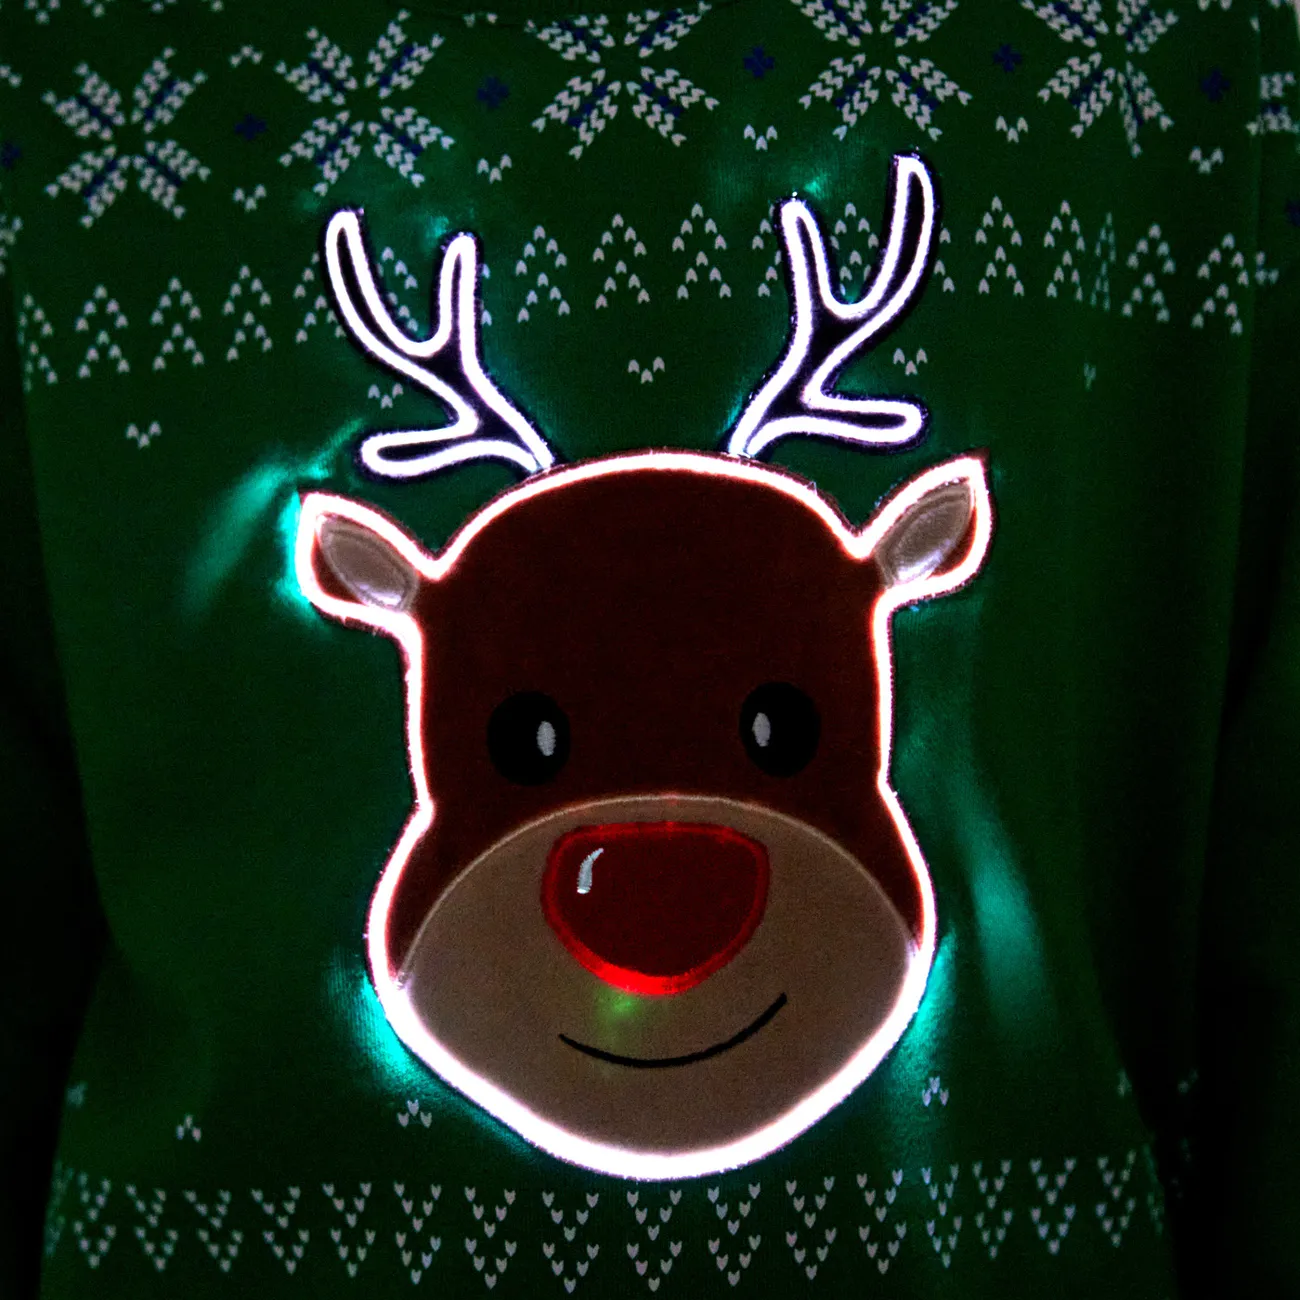 Go-Glow Christmas Illuminating Sweatshirt with Light Up Elk Including Controller (Built-In Battery) Green big image 1